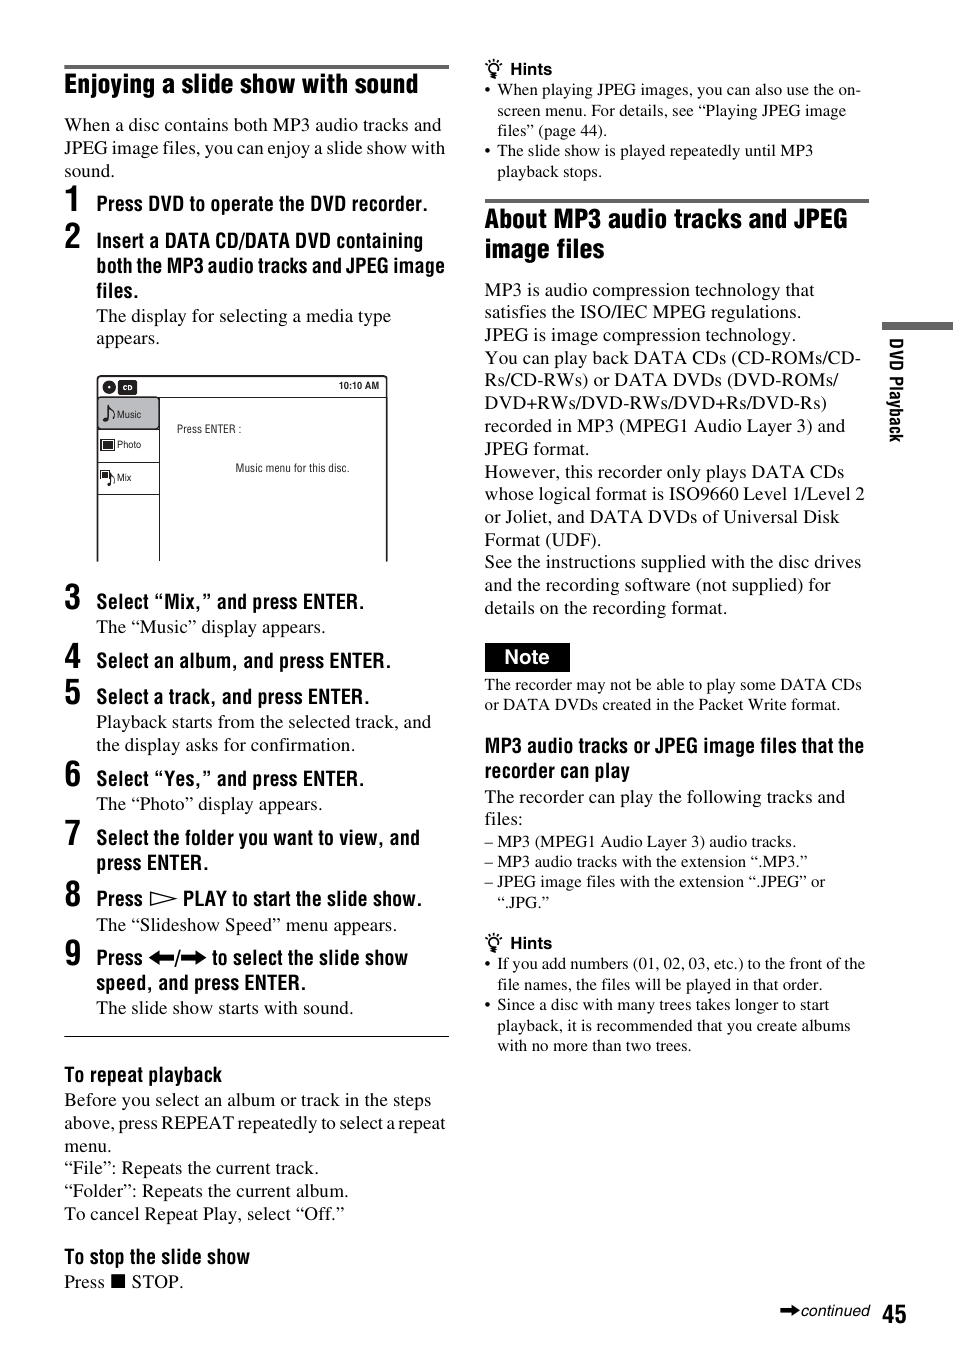 Enjoying a slide show with sound, About mp3 audio tracks and jpeg image files | Sony RDR-VX521 User Manual | Page 45 / 132